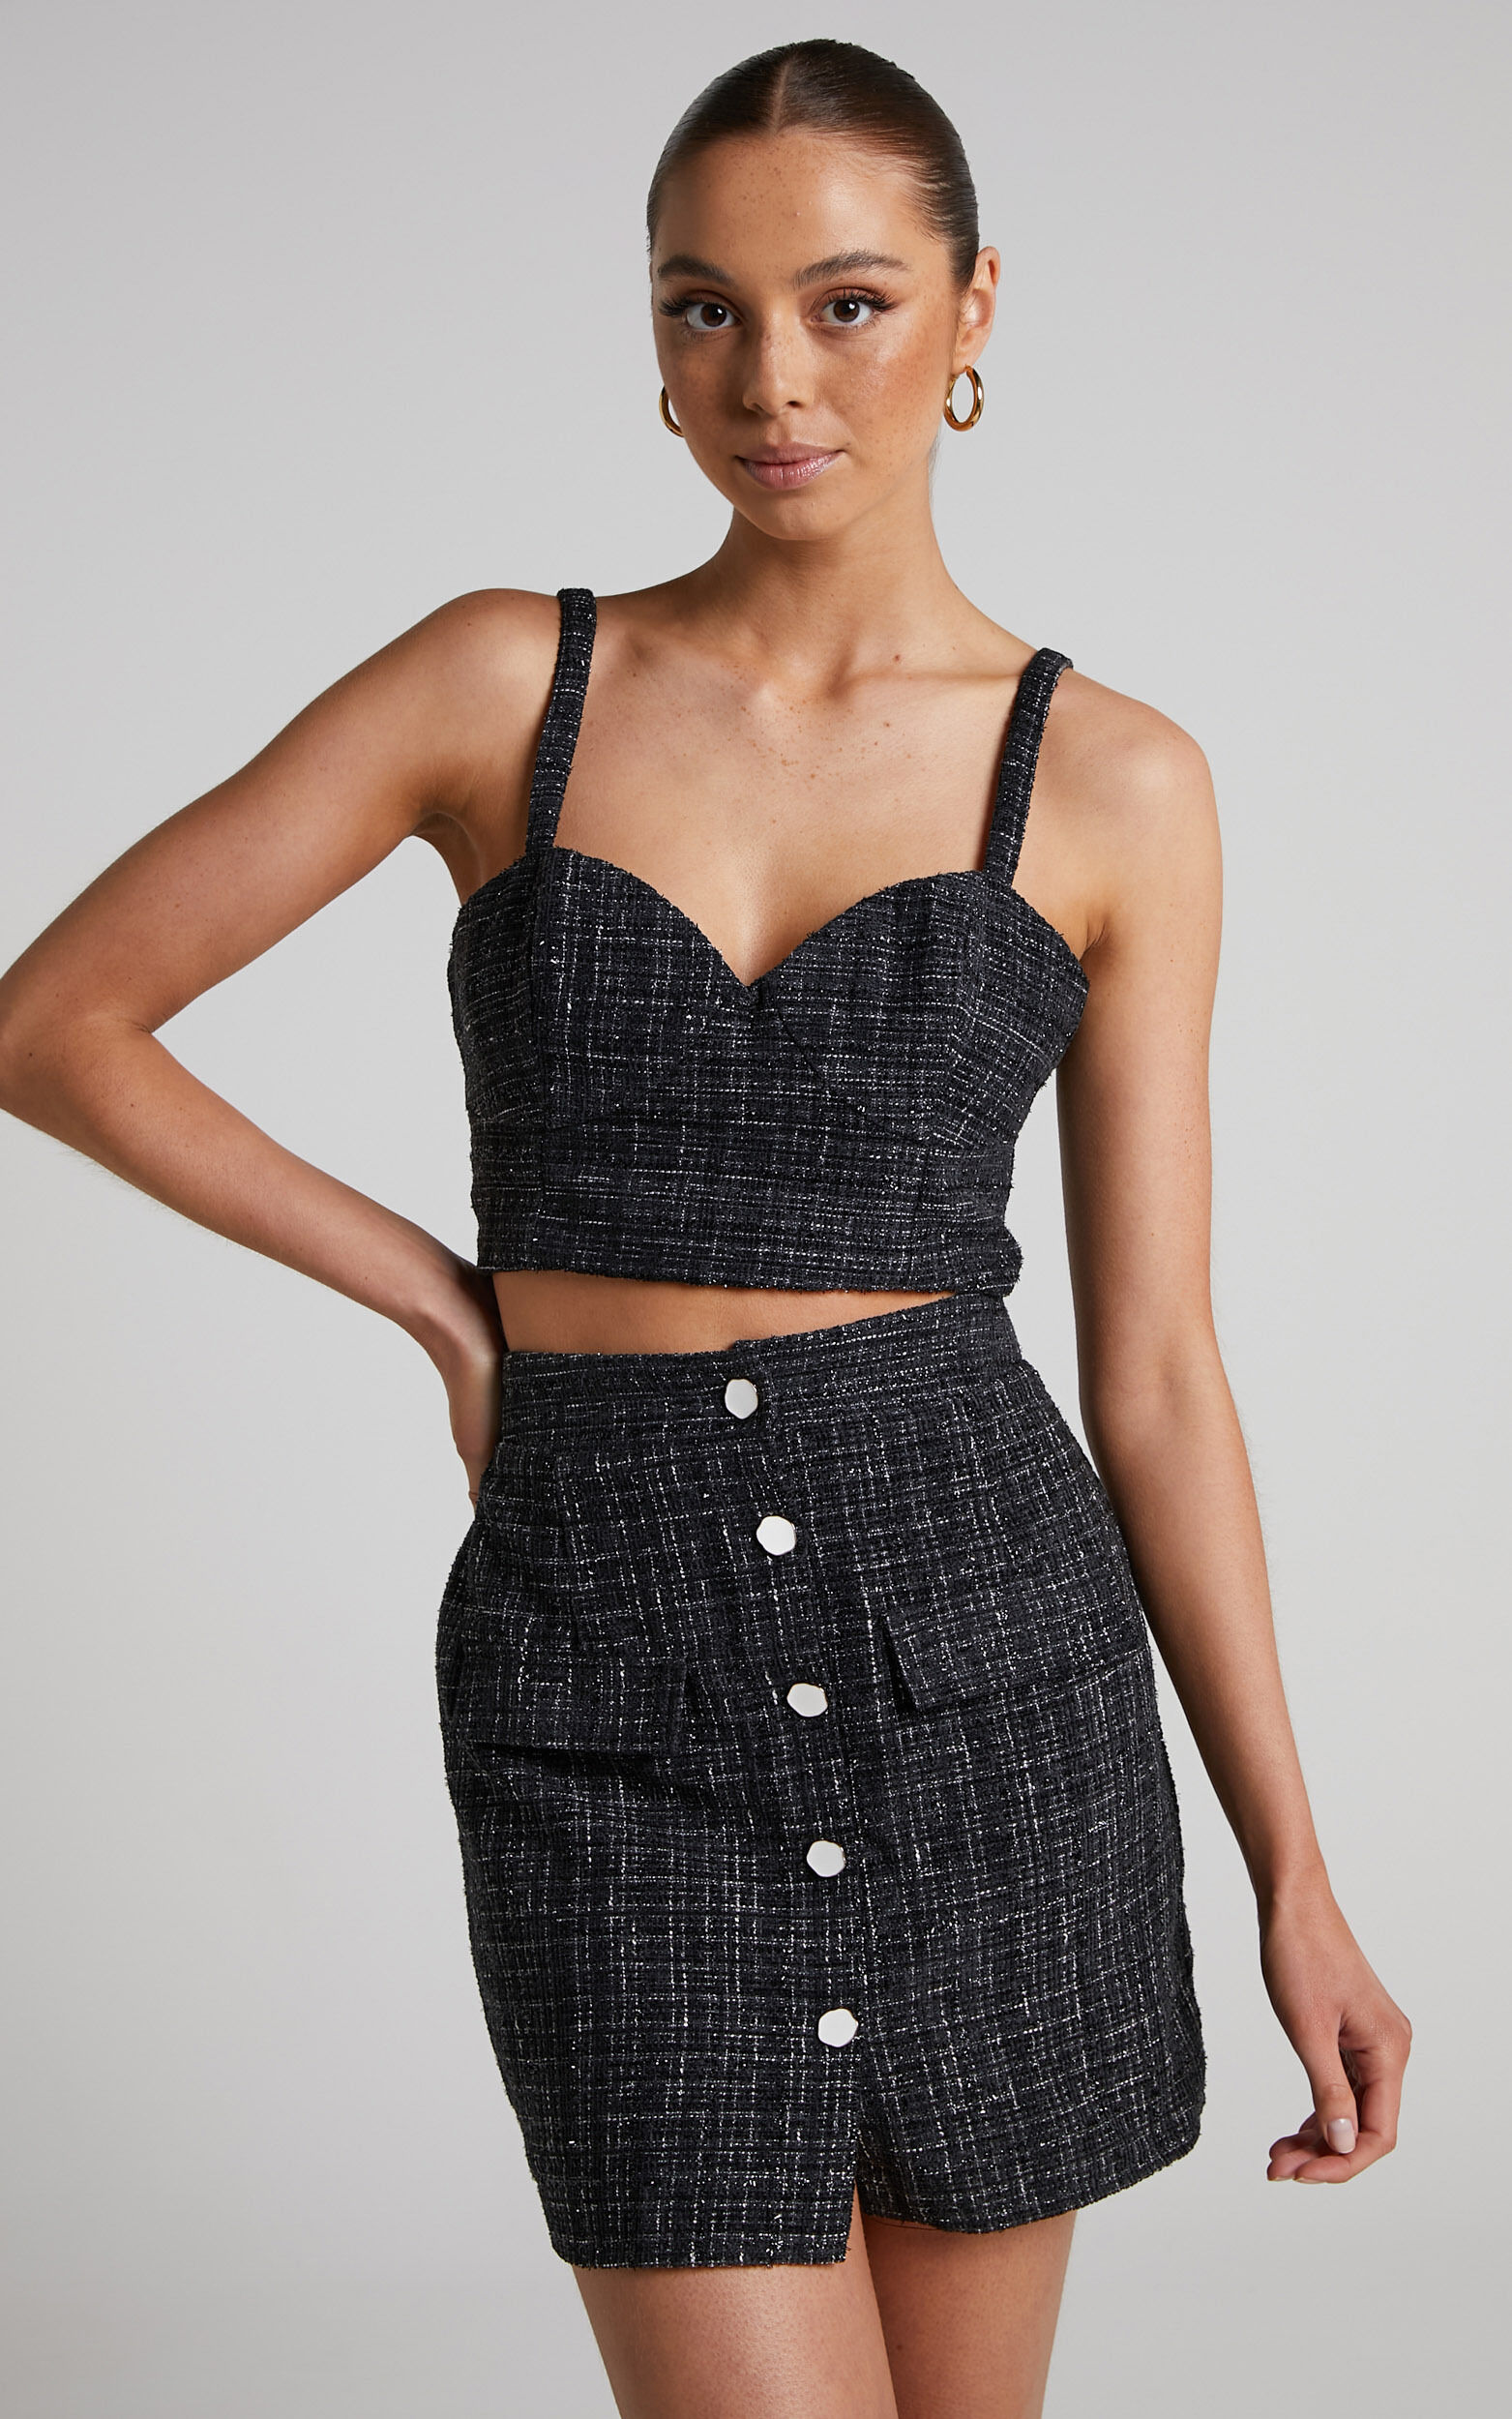 Bjorn Two Piece Set - Boucle Tweed Sweetheart Bralette and Button Up Mini Skirt in Black - 04, BLK1